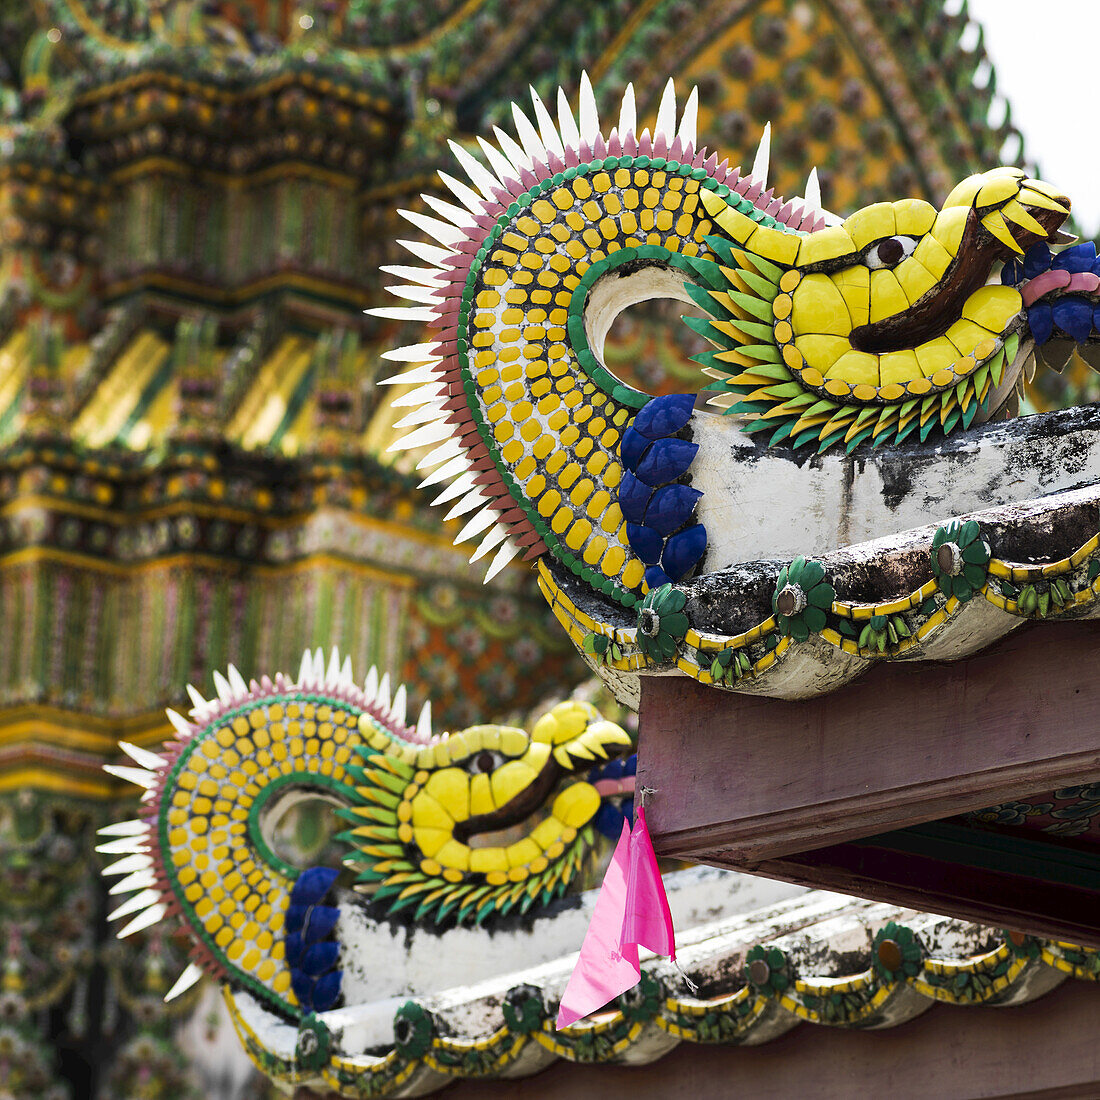 Colourful Sculpture Of A Dragon With An Ornate Building In The Background; Bangkok, Thailand